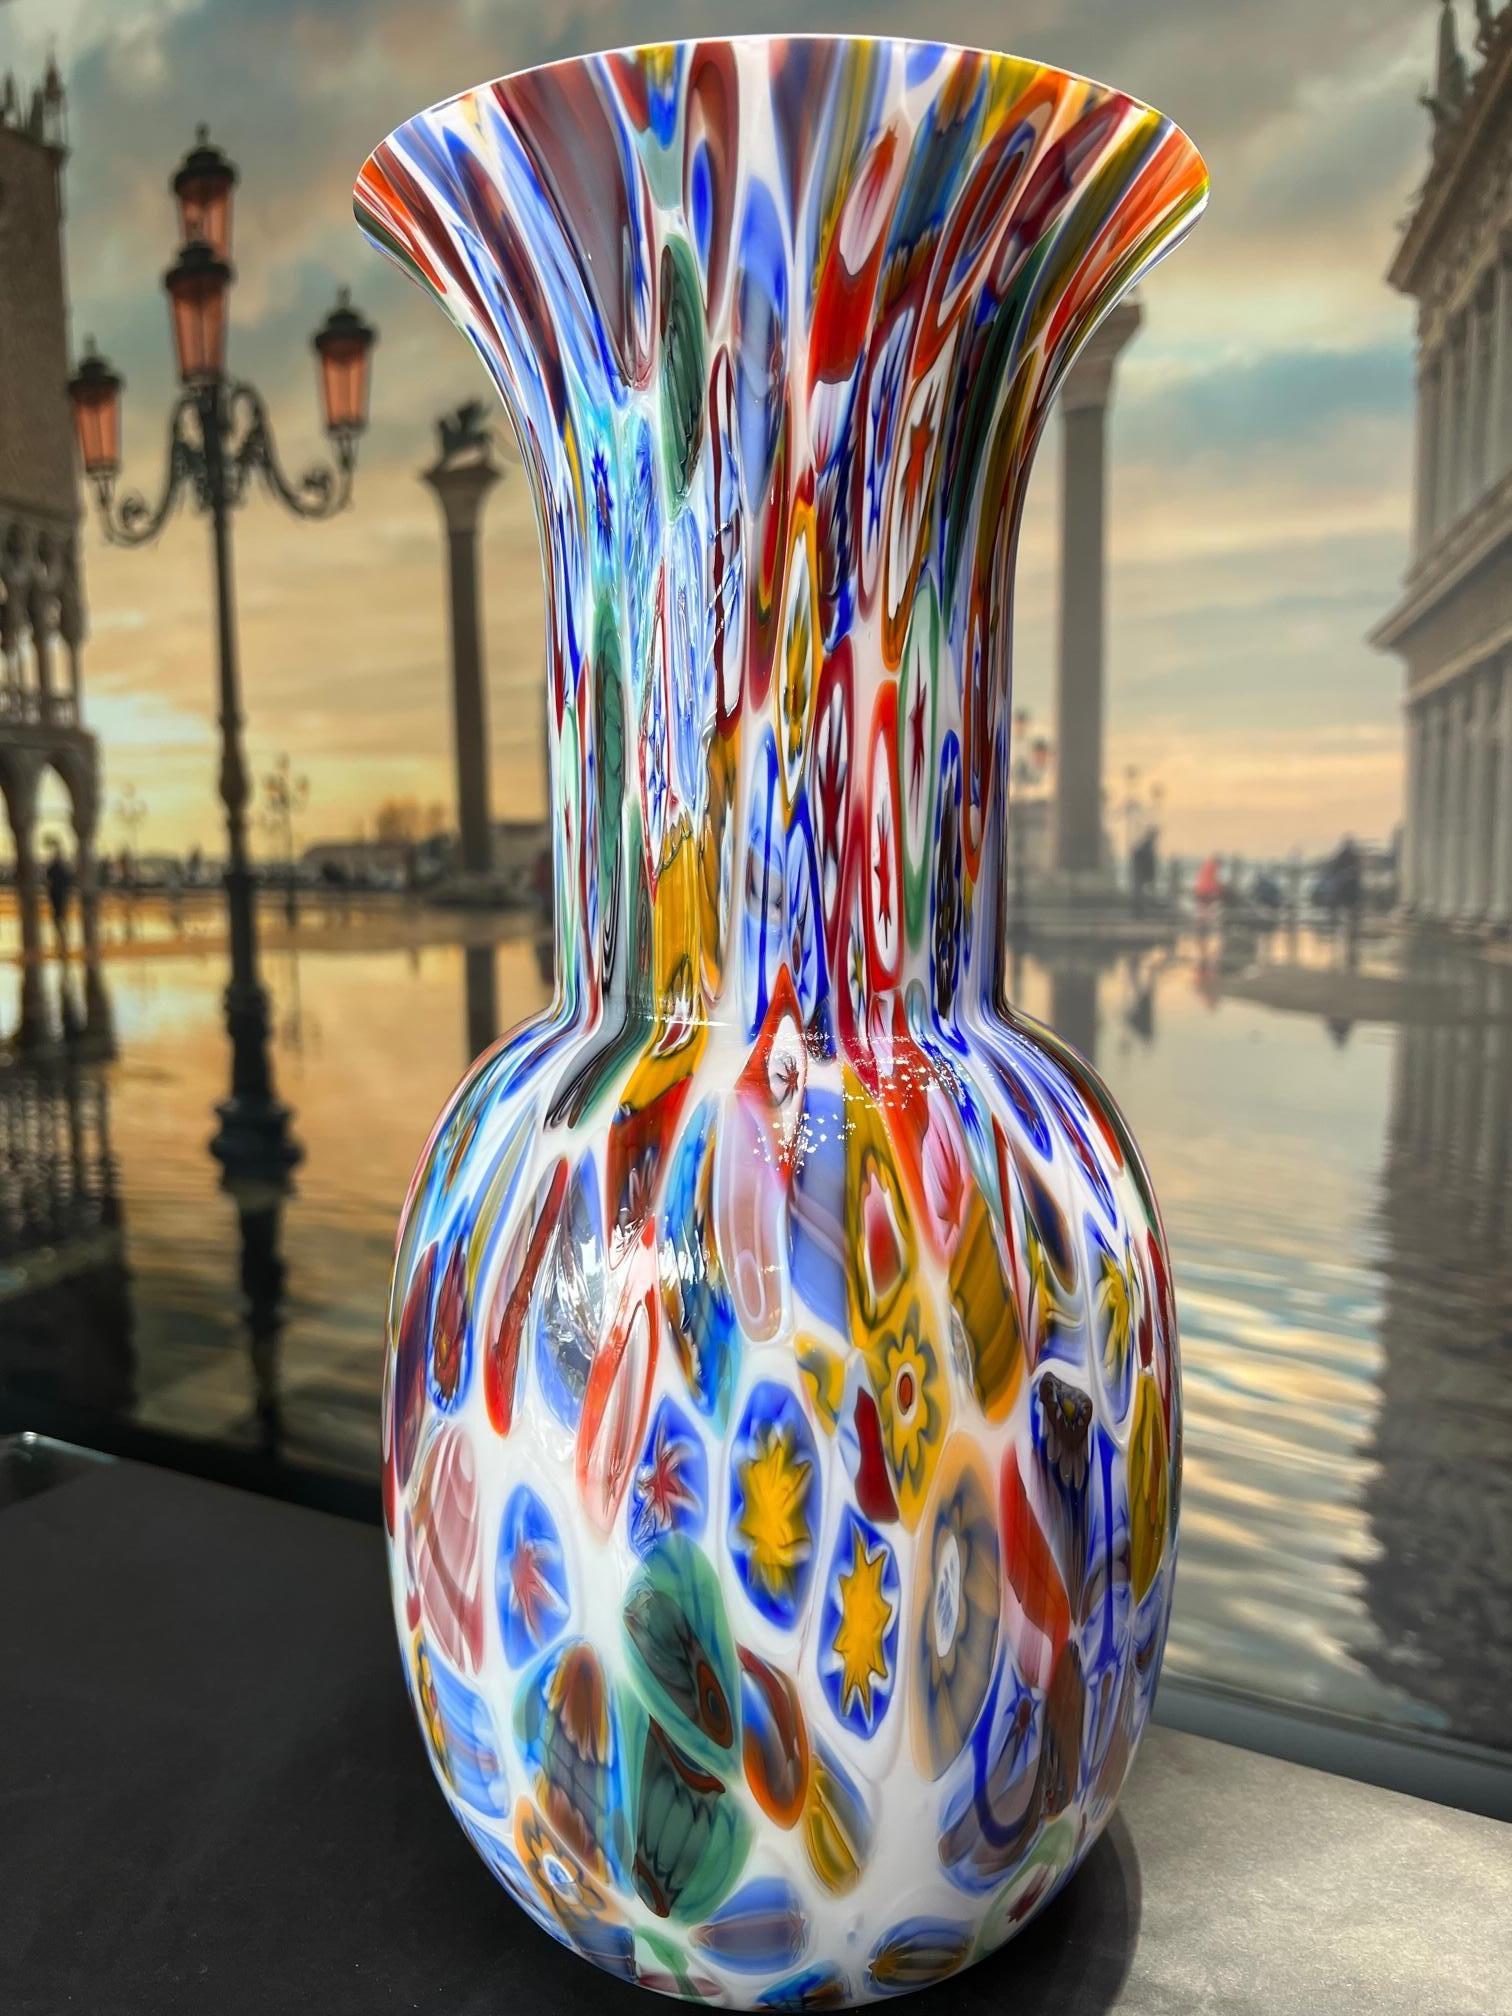 Our aim is the emotion, through glass, lighten by the spirit of art.

1295 MURANO is a furnace, a design lab and an interior point of view
regarding to the most exclusive productions of Murano glass.
Our glass is original, made with the antique